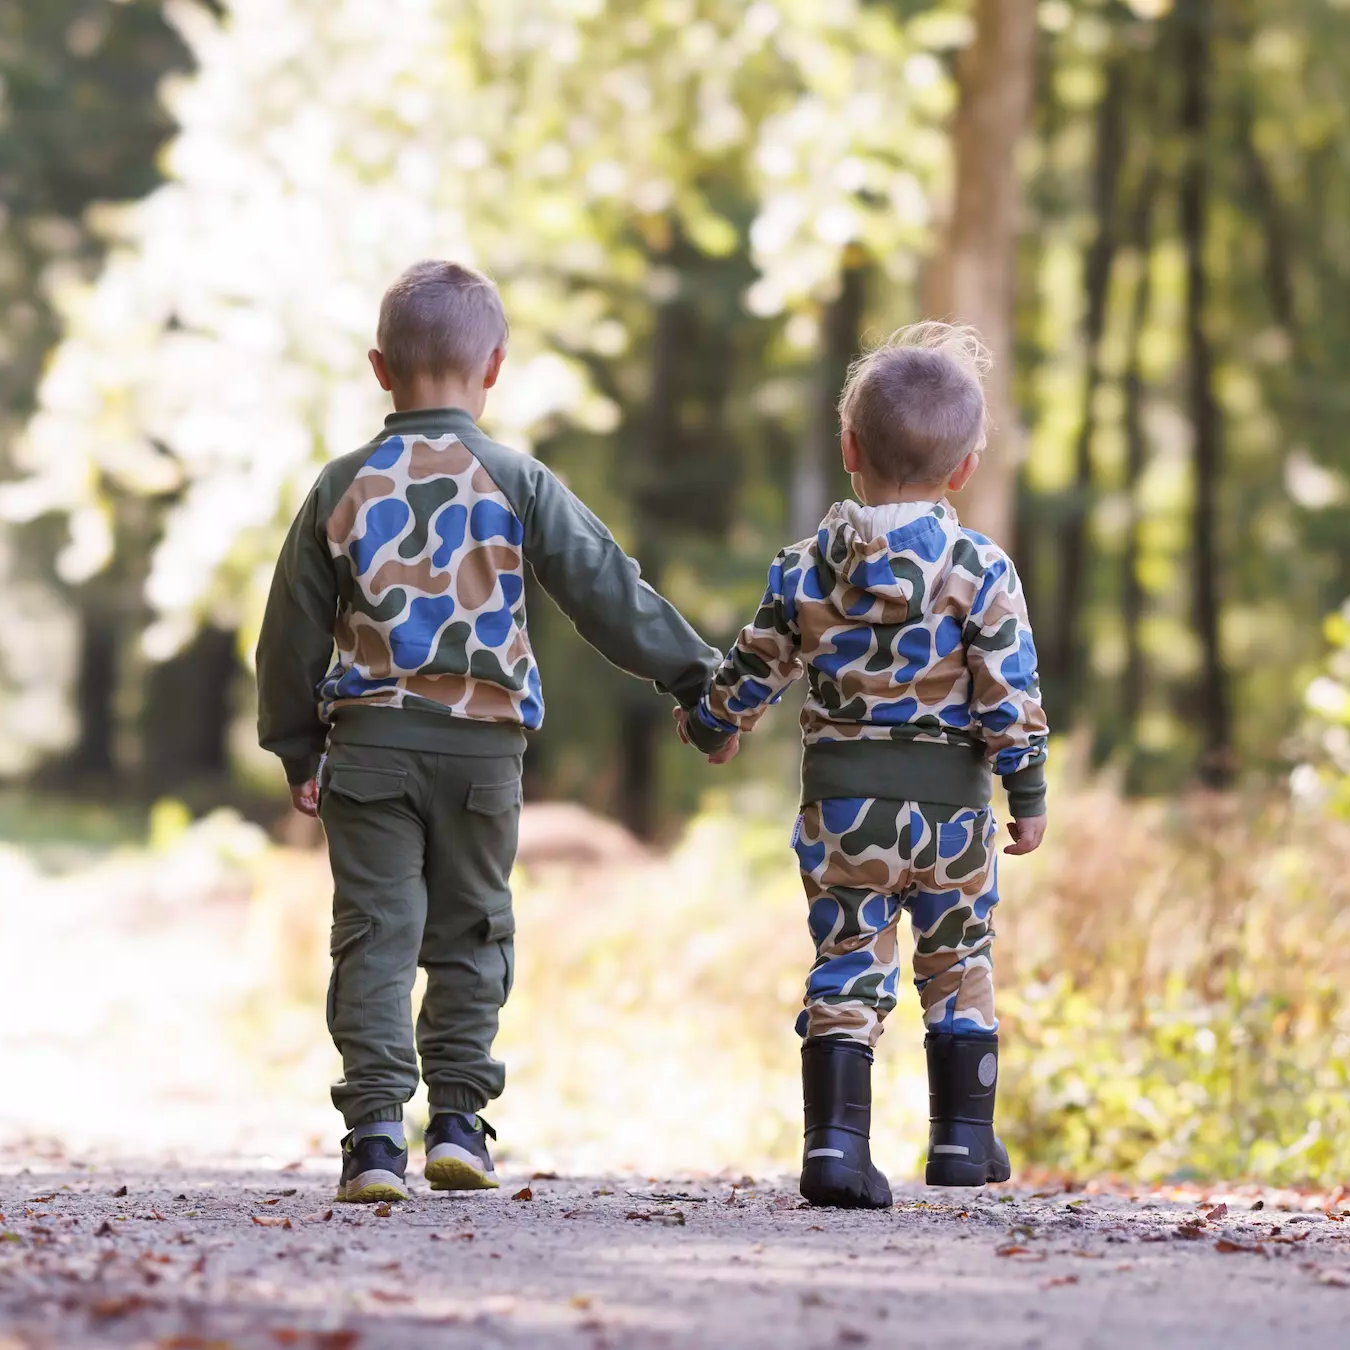 4 advantages of environmentally friendly and sustainable children's clothing